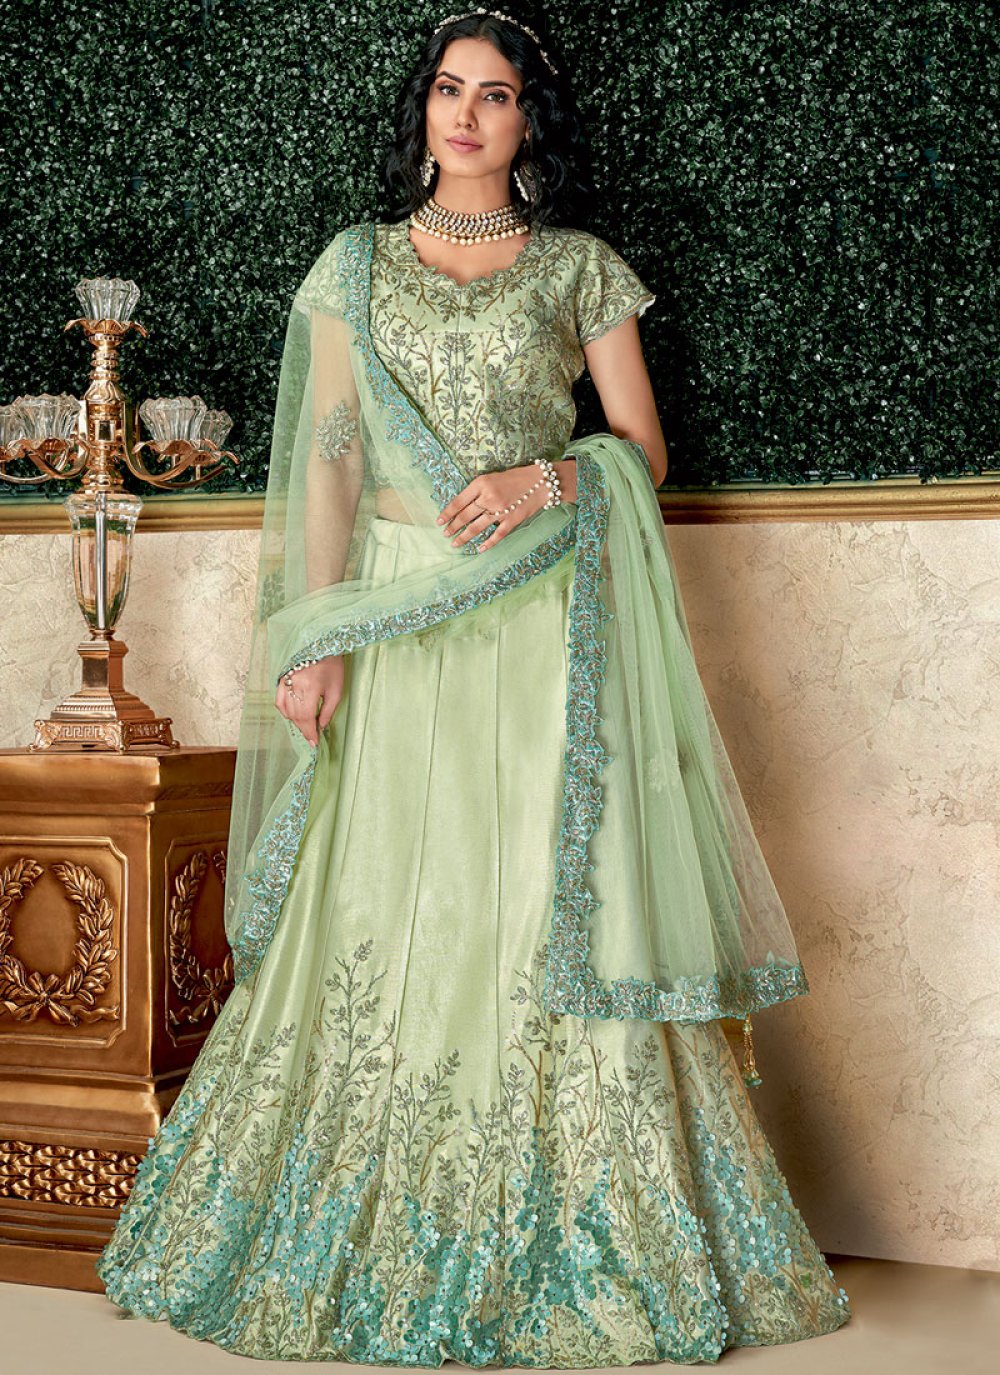 Photo of Bride in light green lehenga and floral jewellery